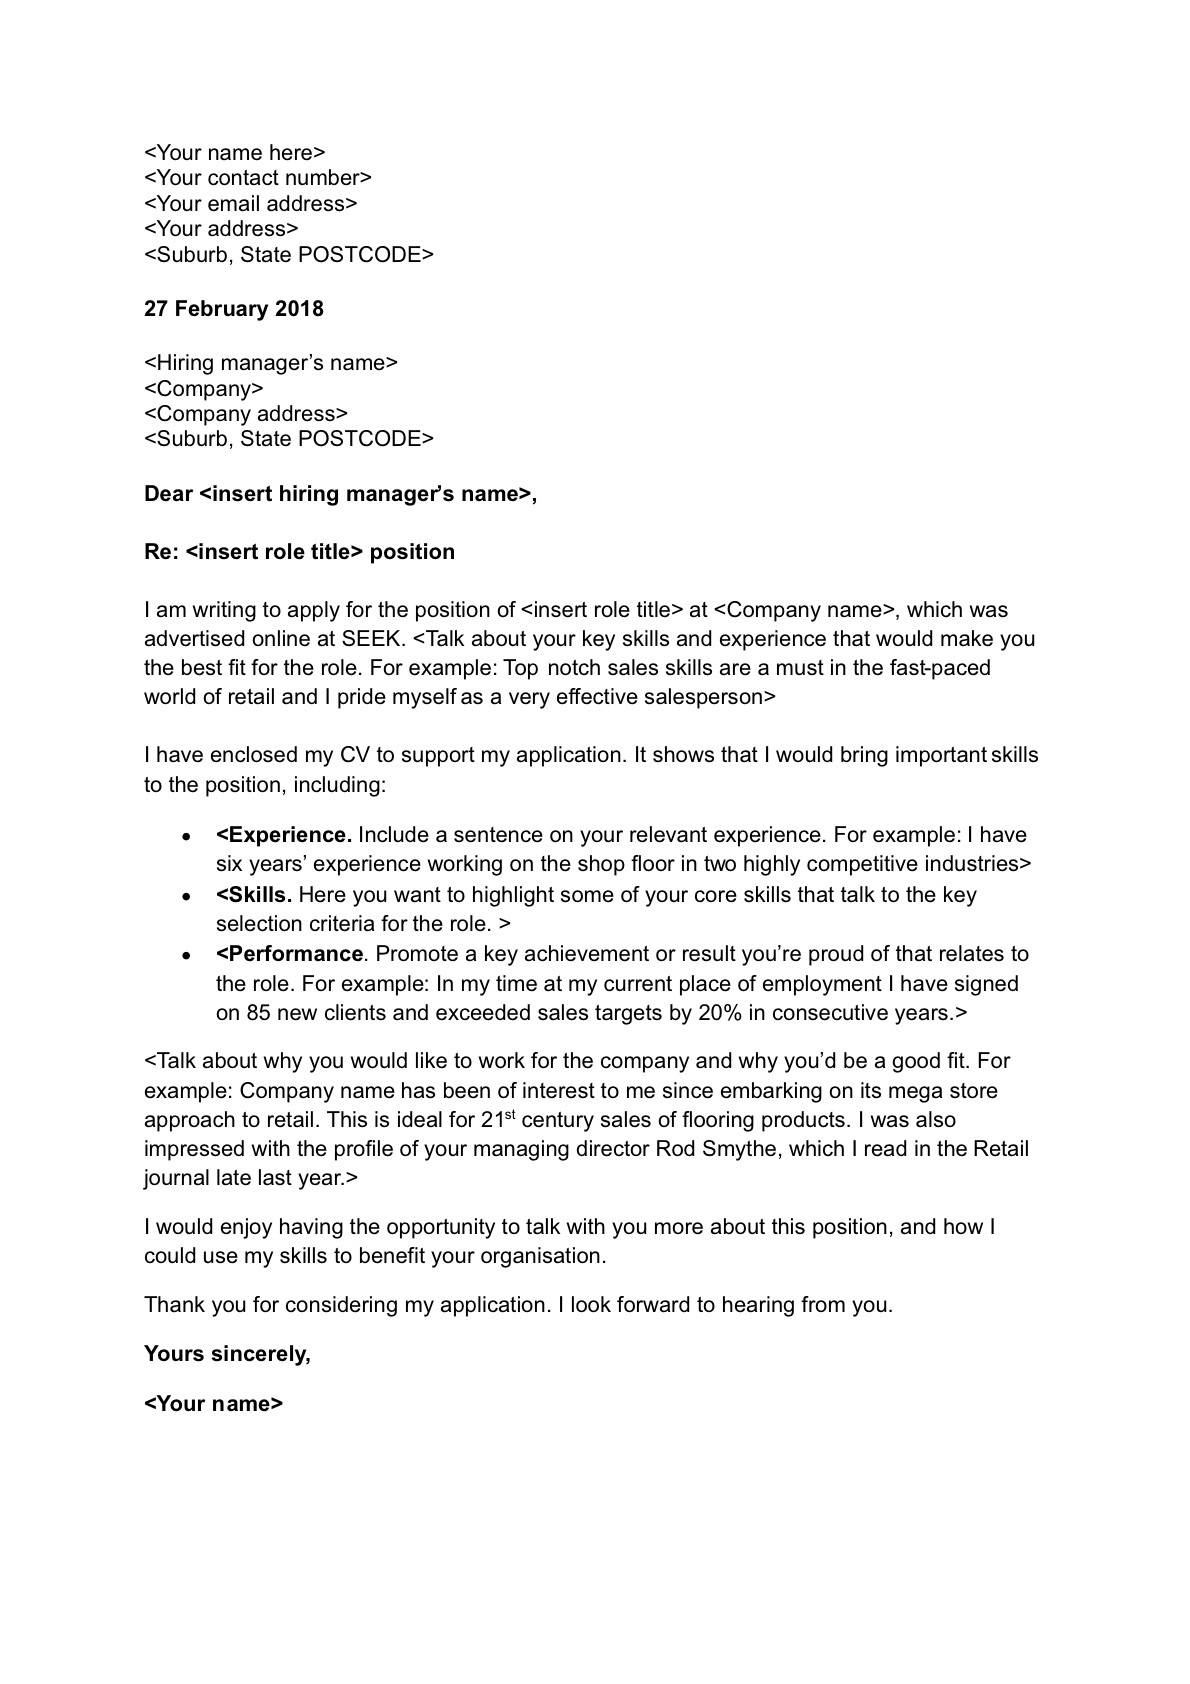 Sample Letter For Job Opportunity from seekconz.corewebdna.net.au